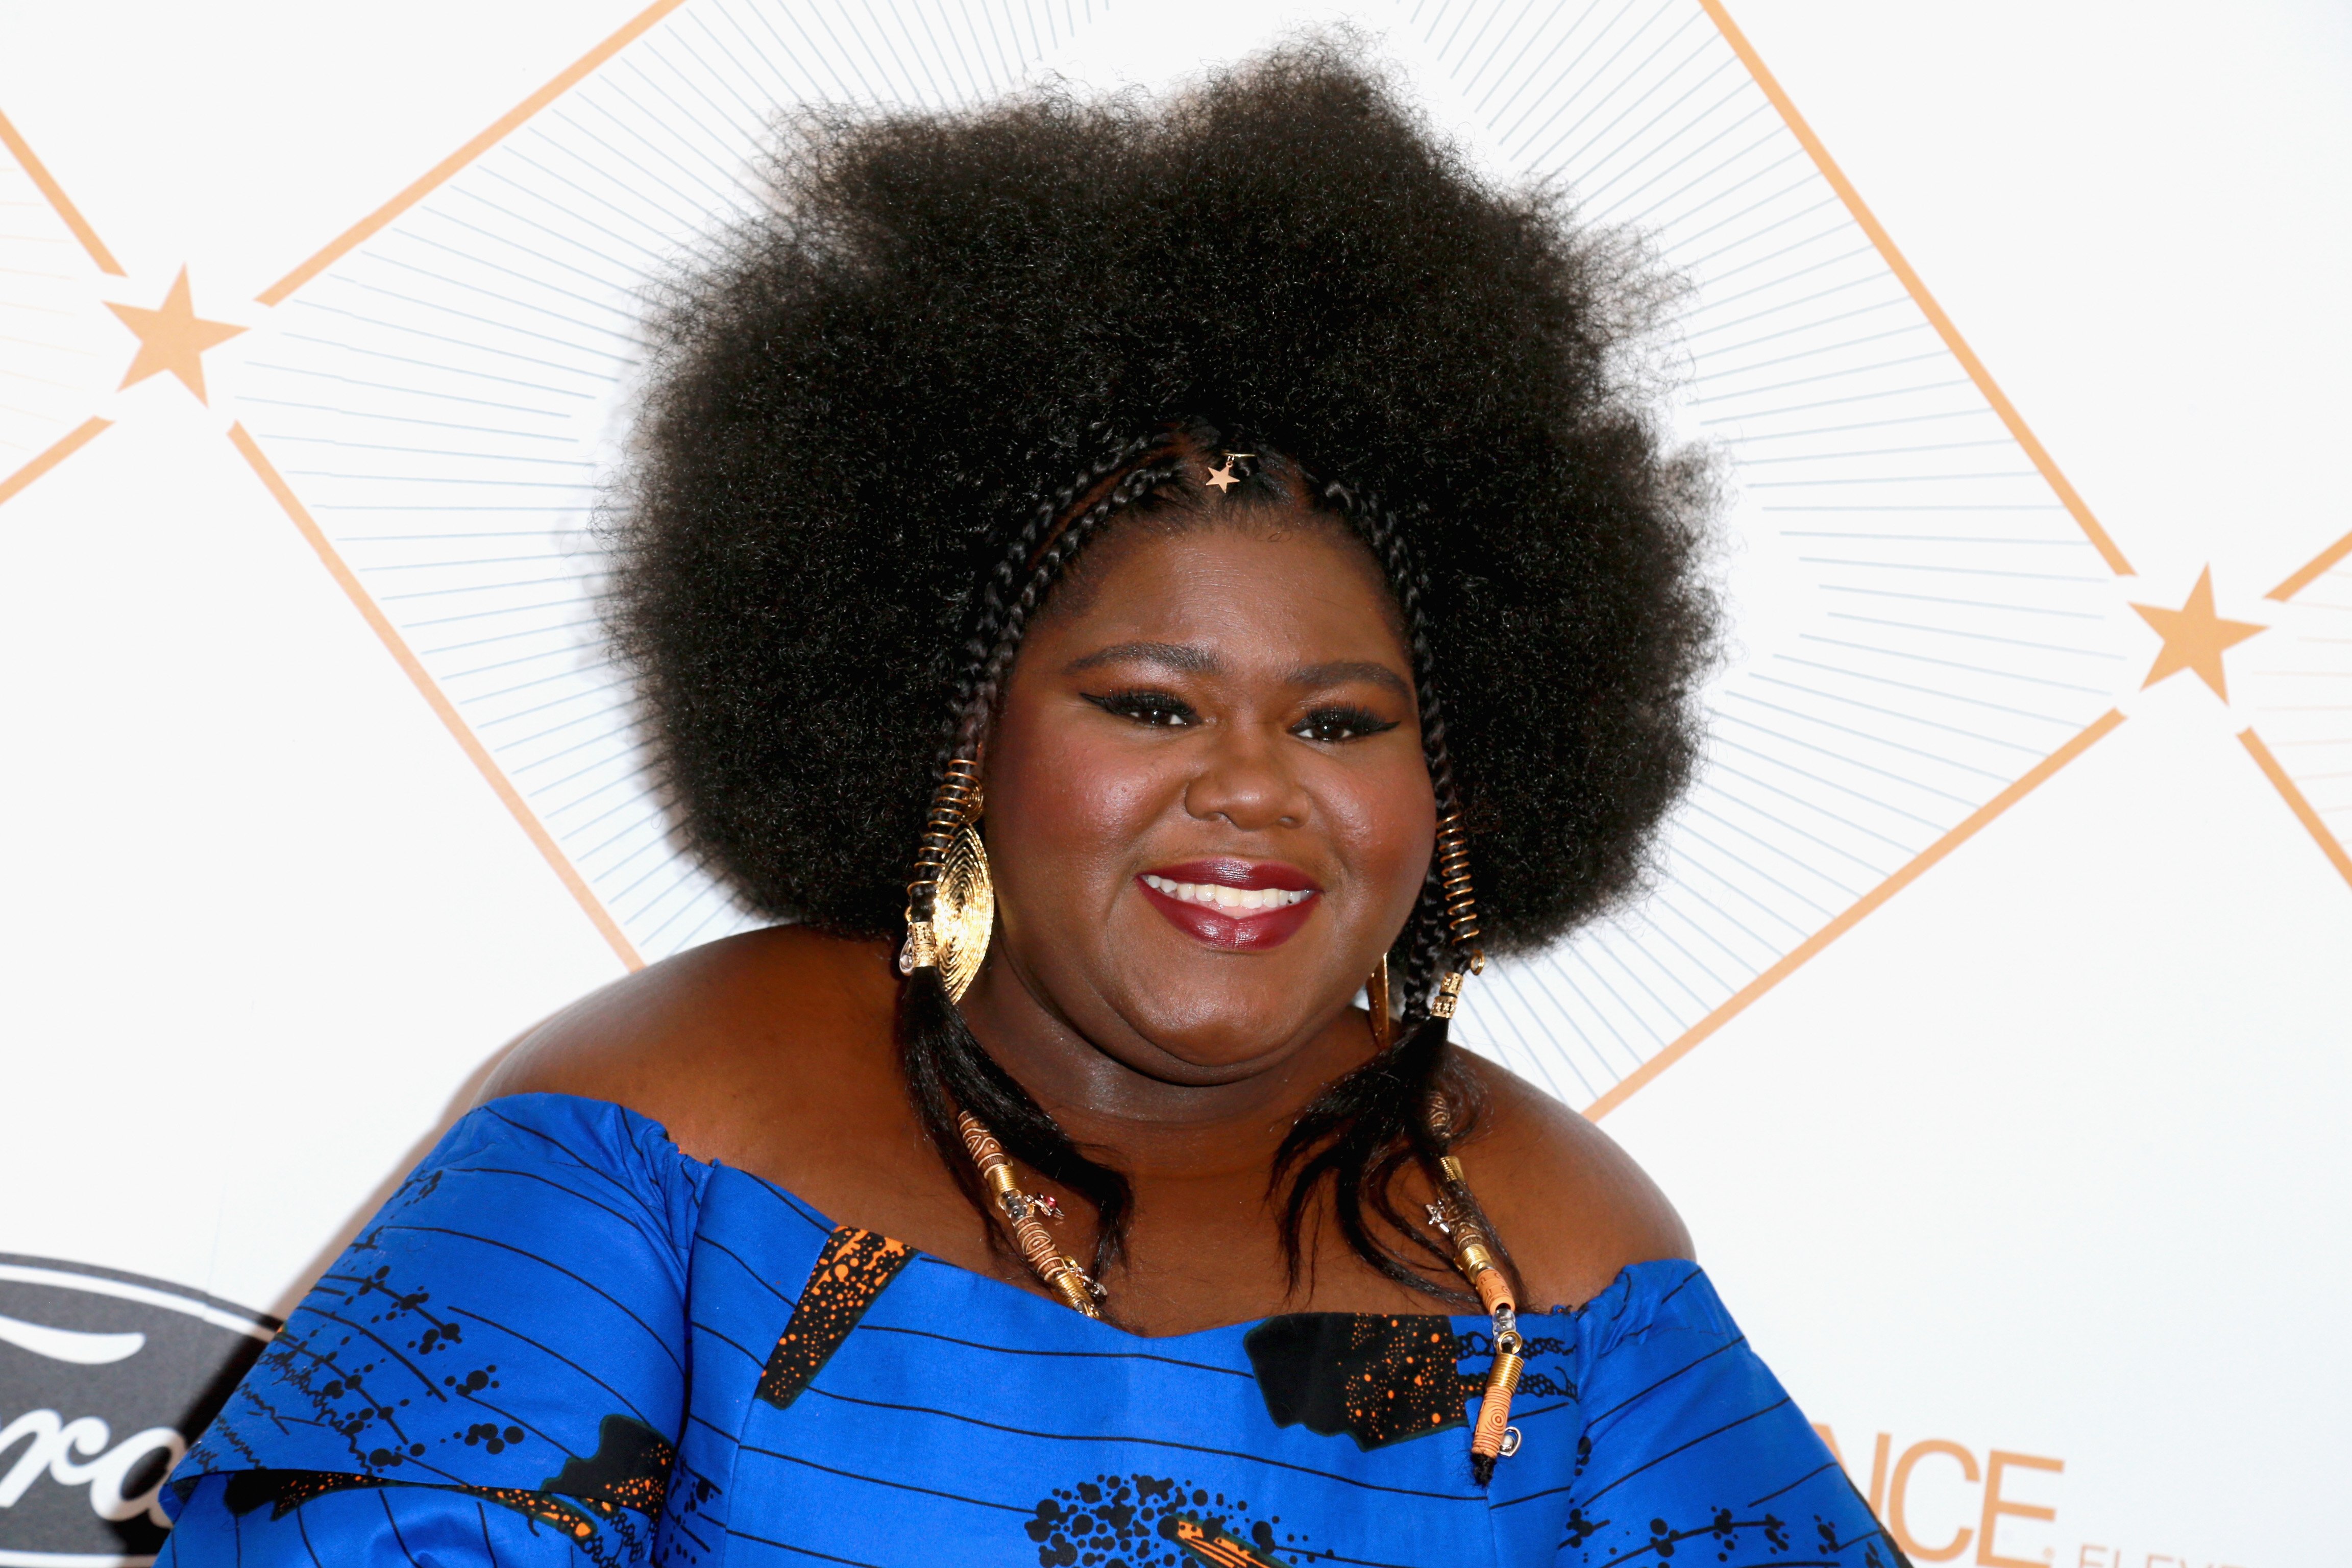 Gabourey Sidibe at the 2018 Essence Black Women In Hollywood Oscars Luncheon on Mar. 1, 2018 | Photo: Getty Images